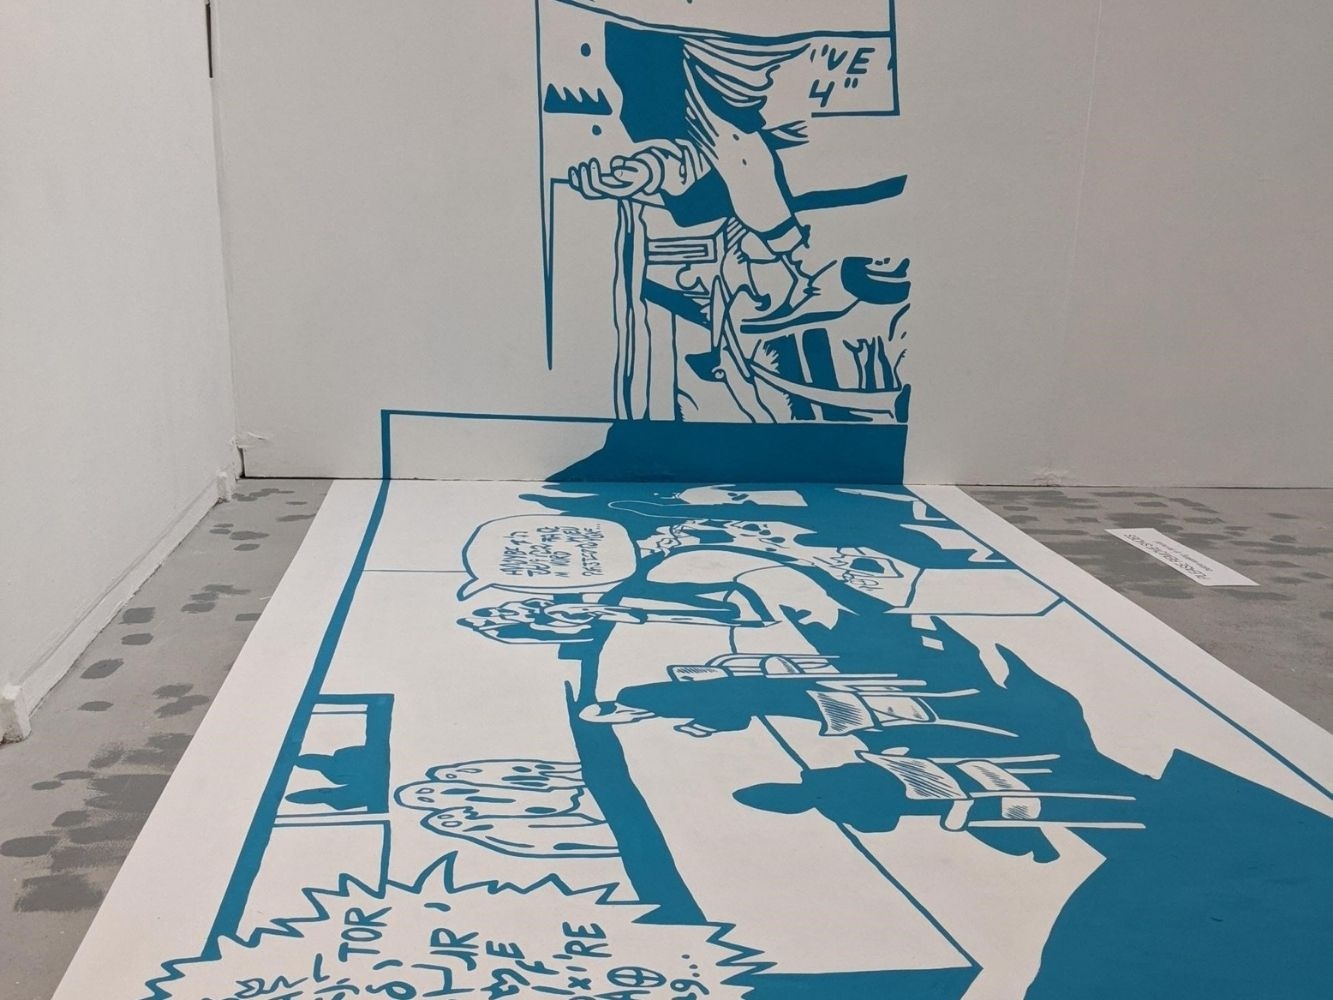 Comic-style blue and white painting on floor and wall